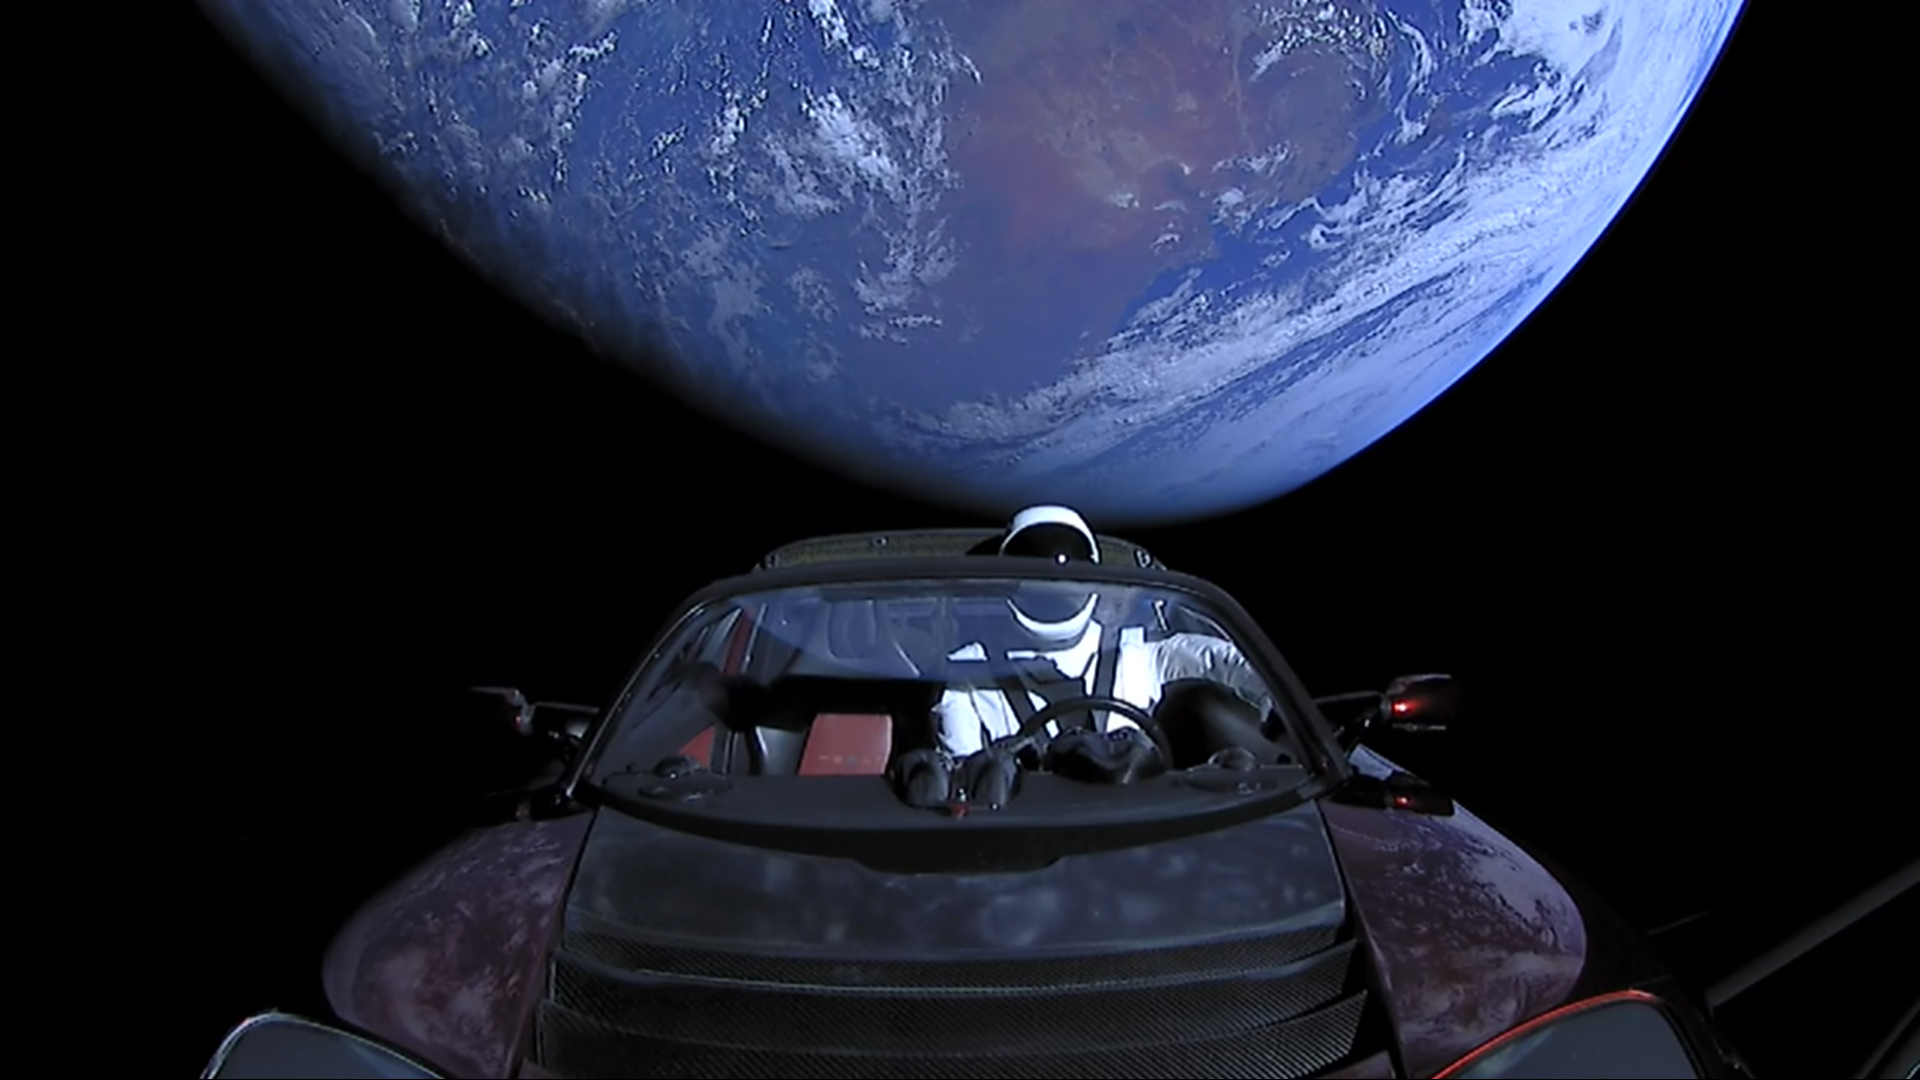 Space car Tesla Roadster has already covered 3,208,624,326 km